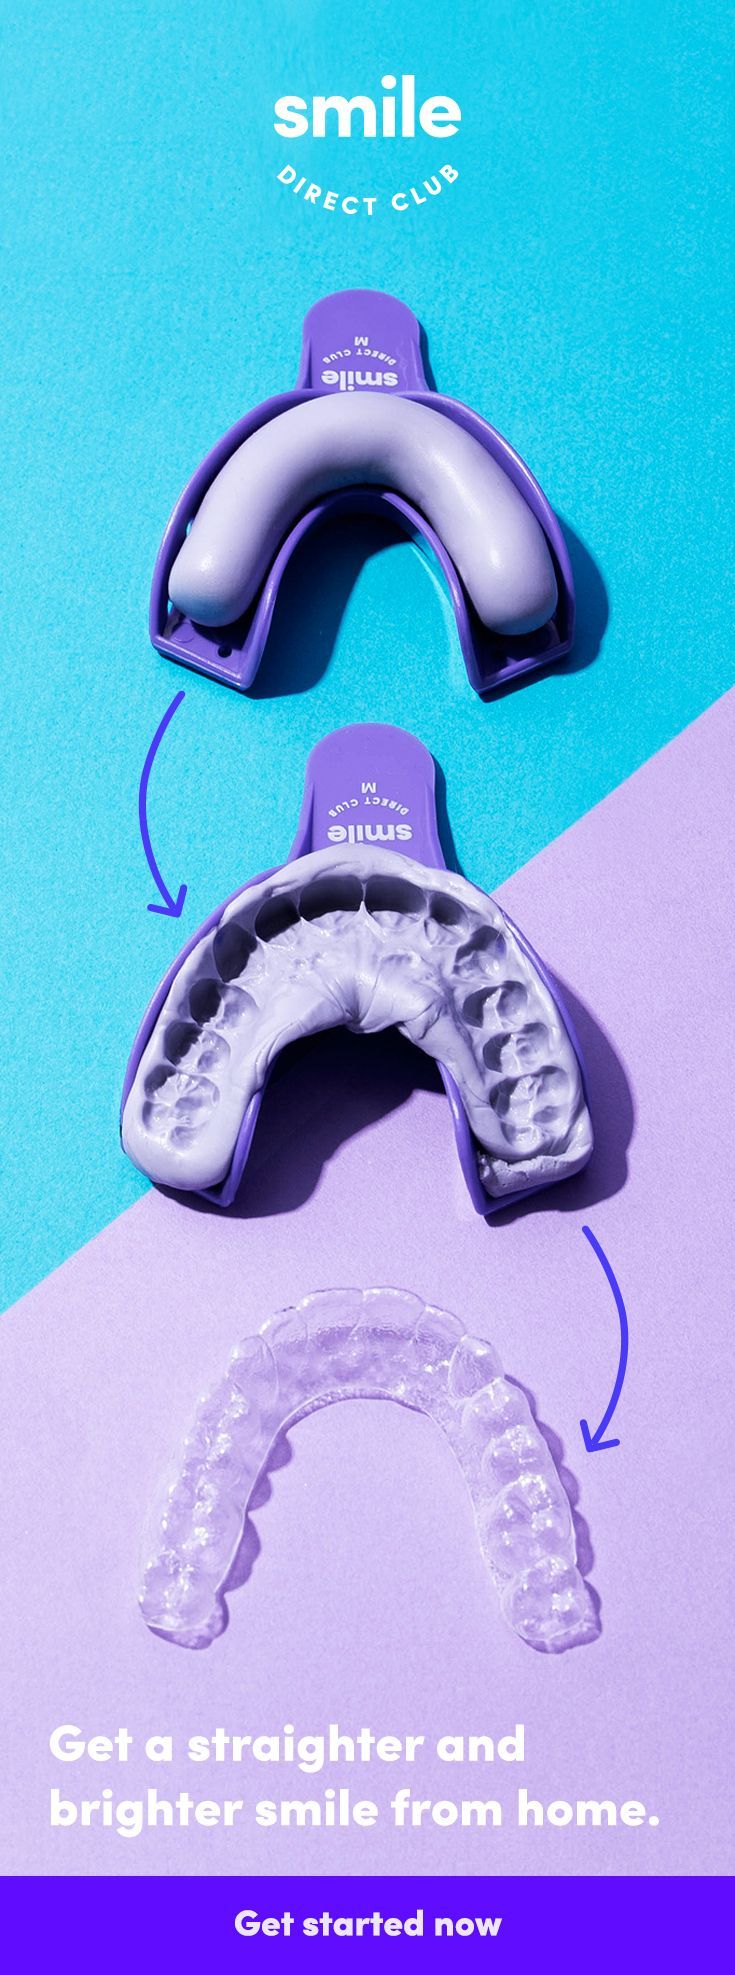 Get your dream smile for up to 60% less than braces or other invisible aligners. Click now to see how it works and get started with your free smile assessment today. -   19 healthy recipes For Two easy
 ideas